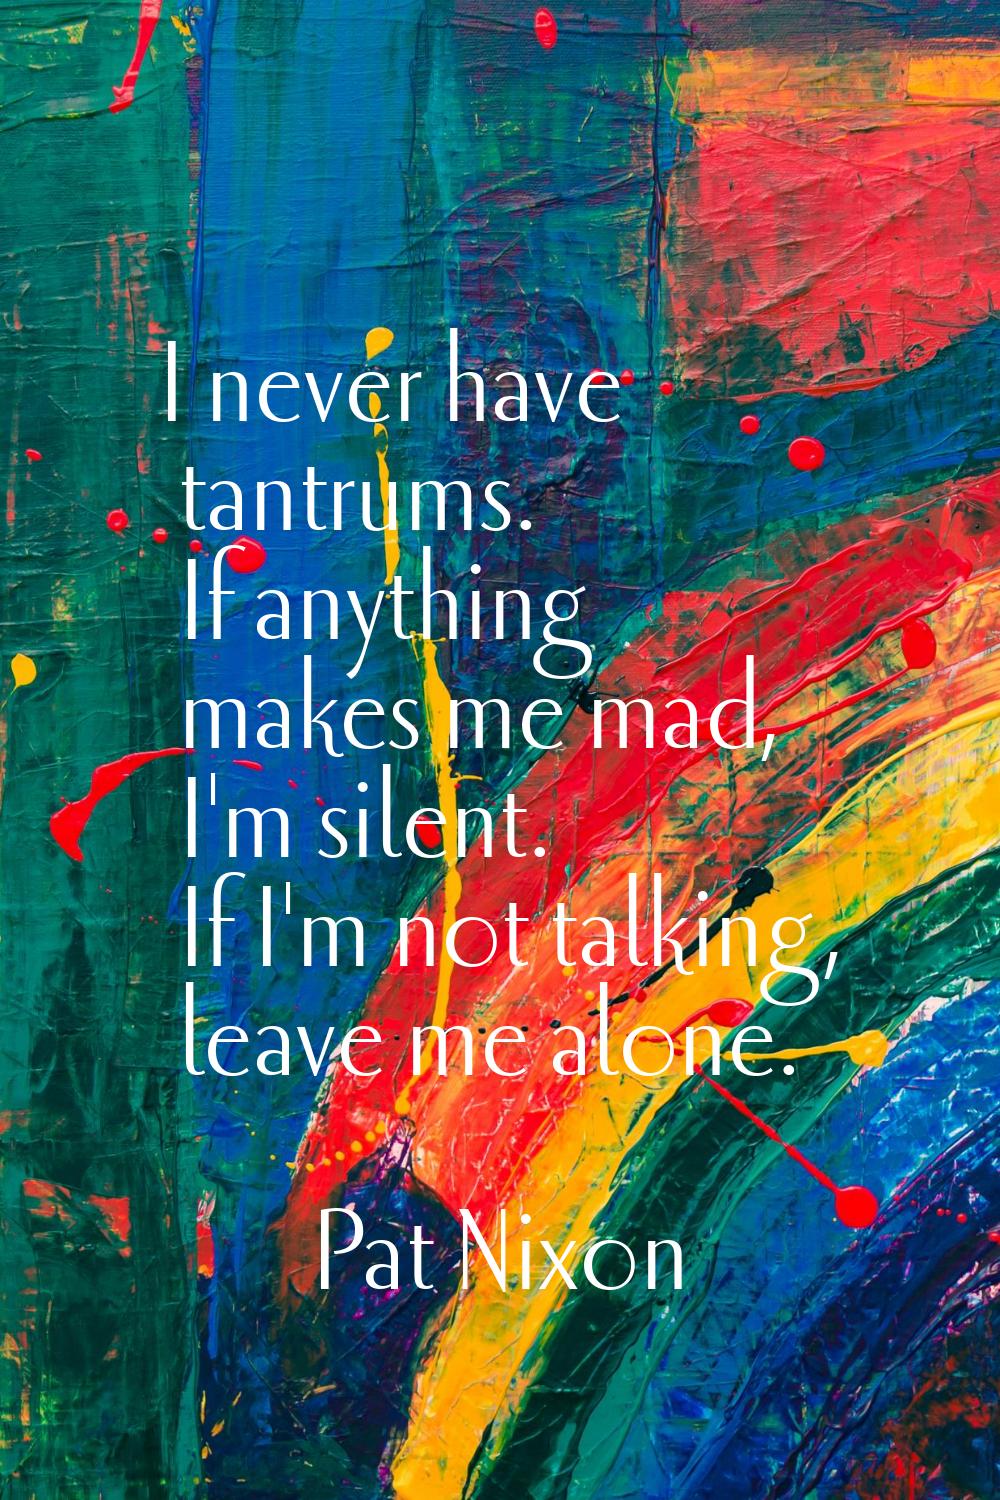 I never have tantrums. If anything makes me mad, I'm silent. If I'm not talking, leave me alone.